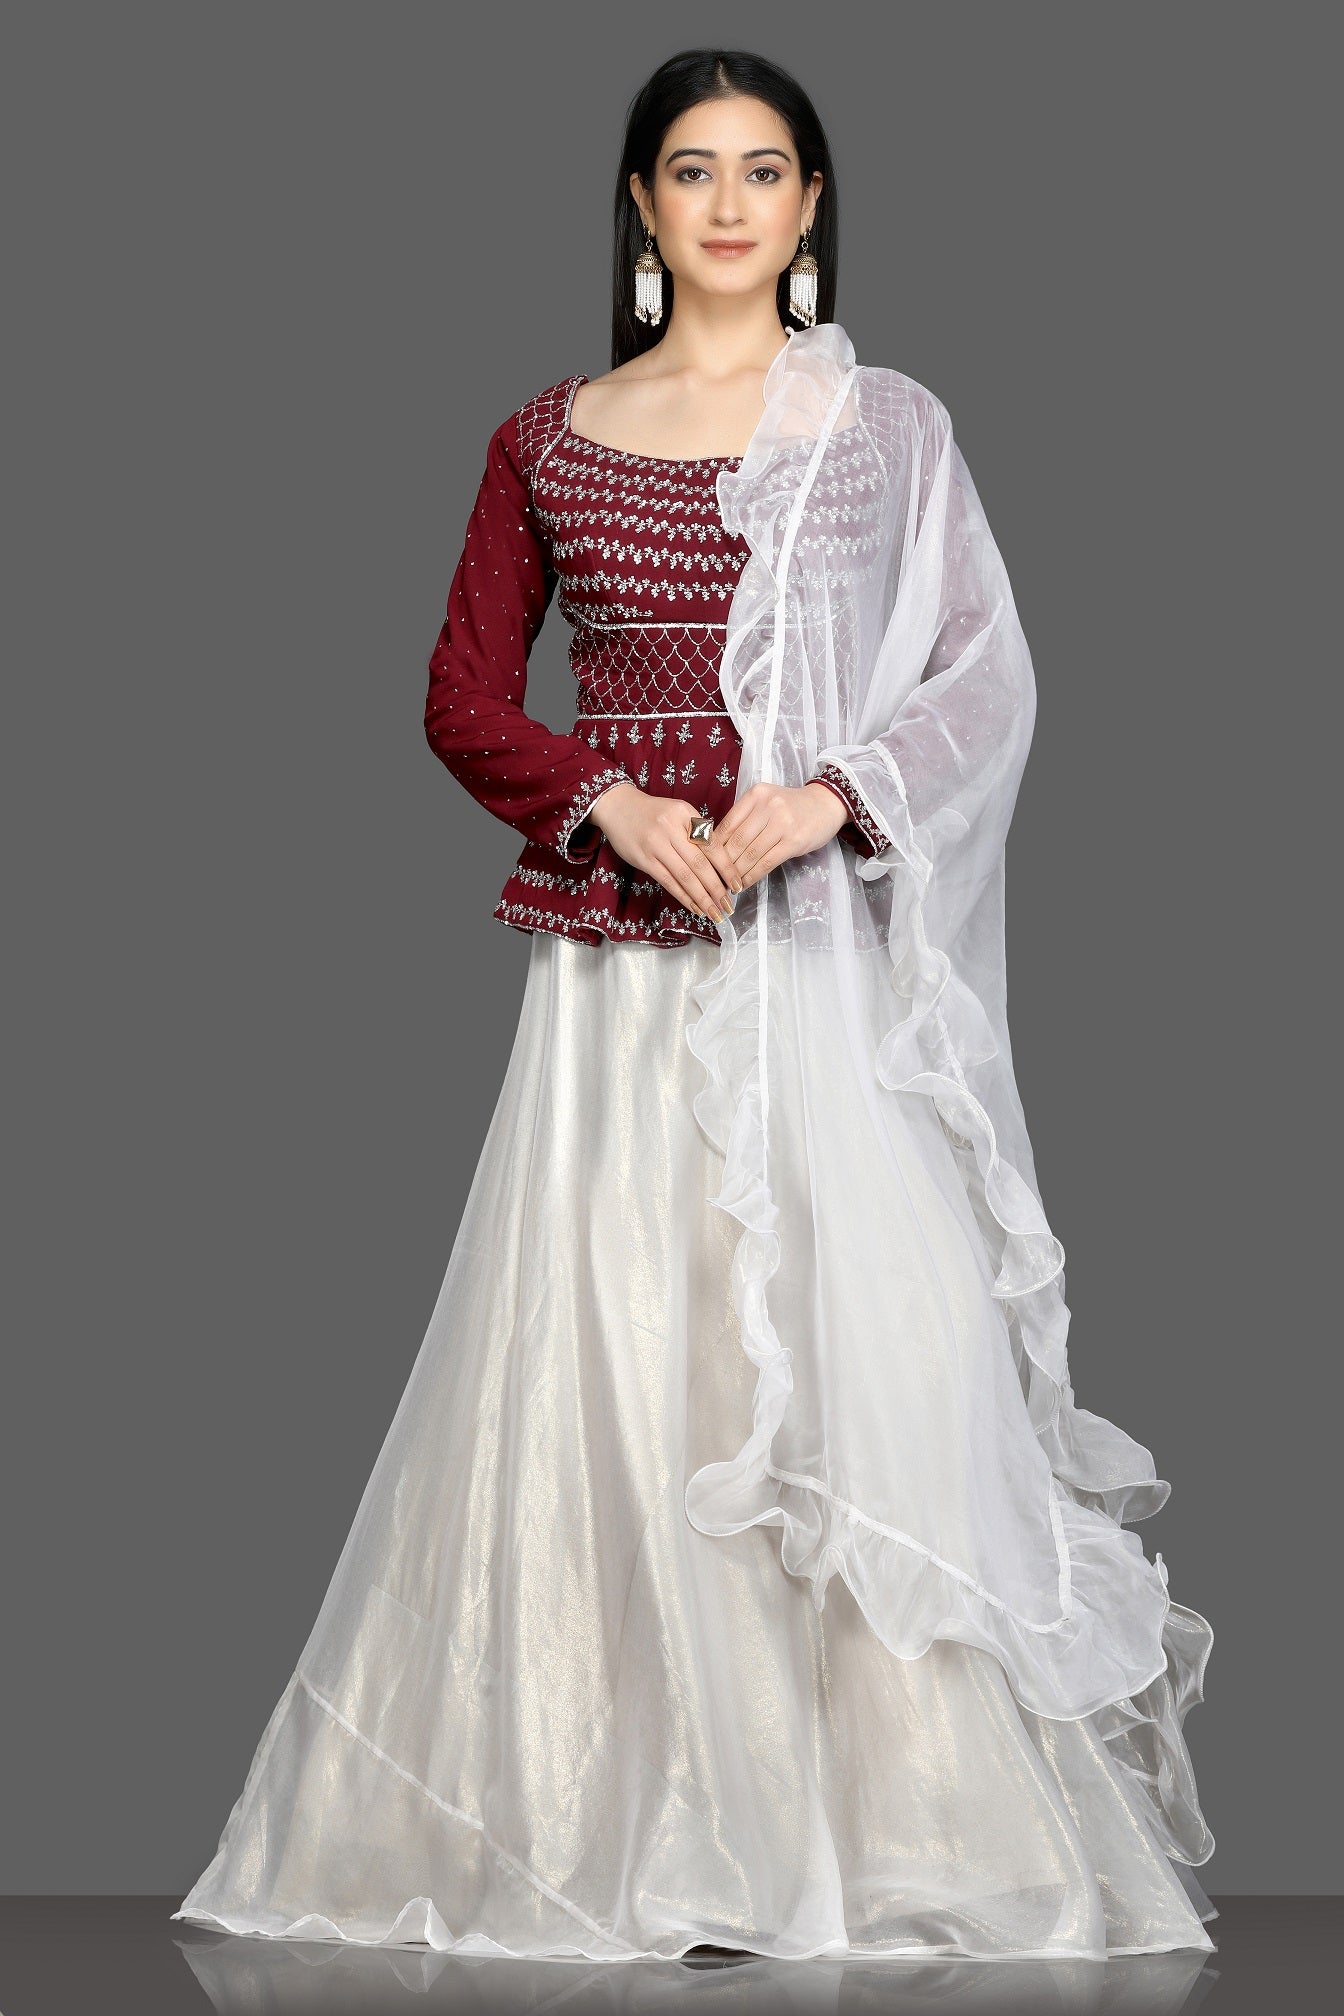 Buy stunning wine and white embroidered lehenga online in USA with white ruffle dupatta. Flaunt your sartorial choices on special occasions with beautiful designer gowns, Anarkali suits, traditional salwar suits, Indian lehengas from Pure Elegance Indian fashion boutique in USA. -full view